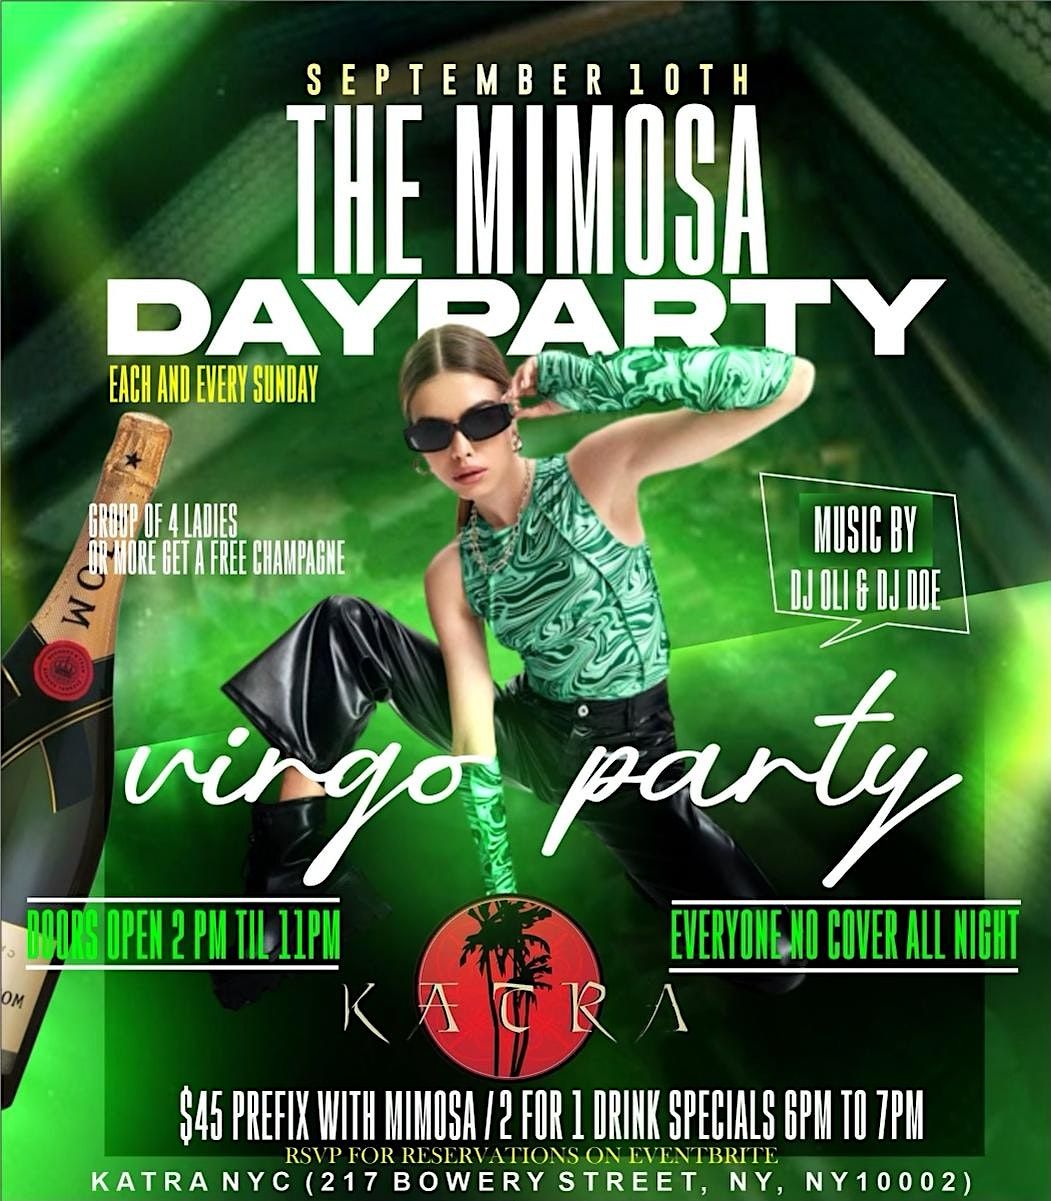 The Mimosa Day Party